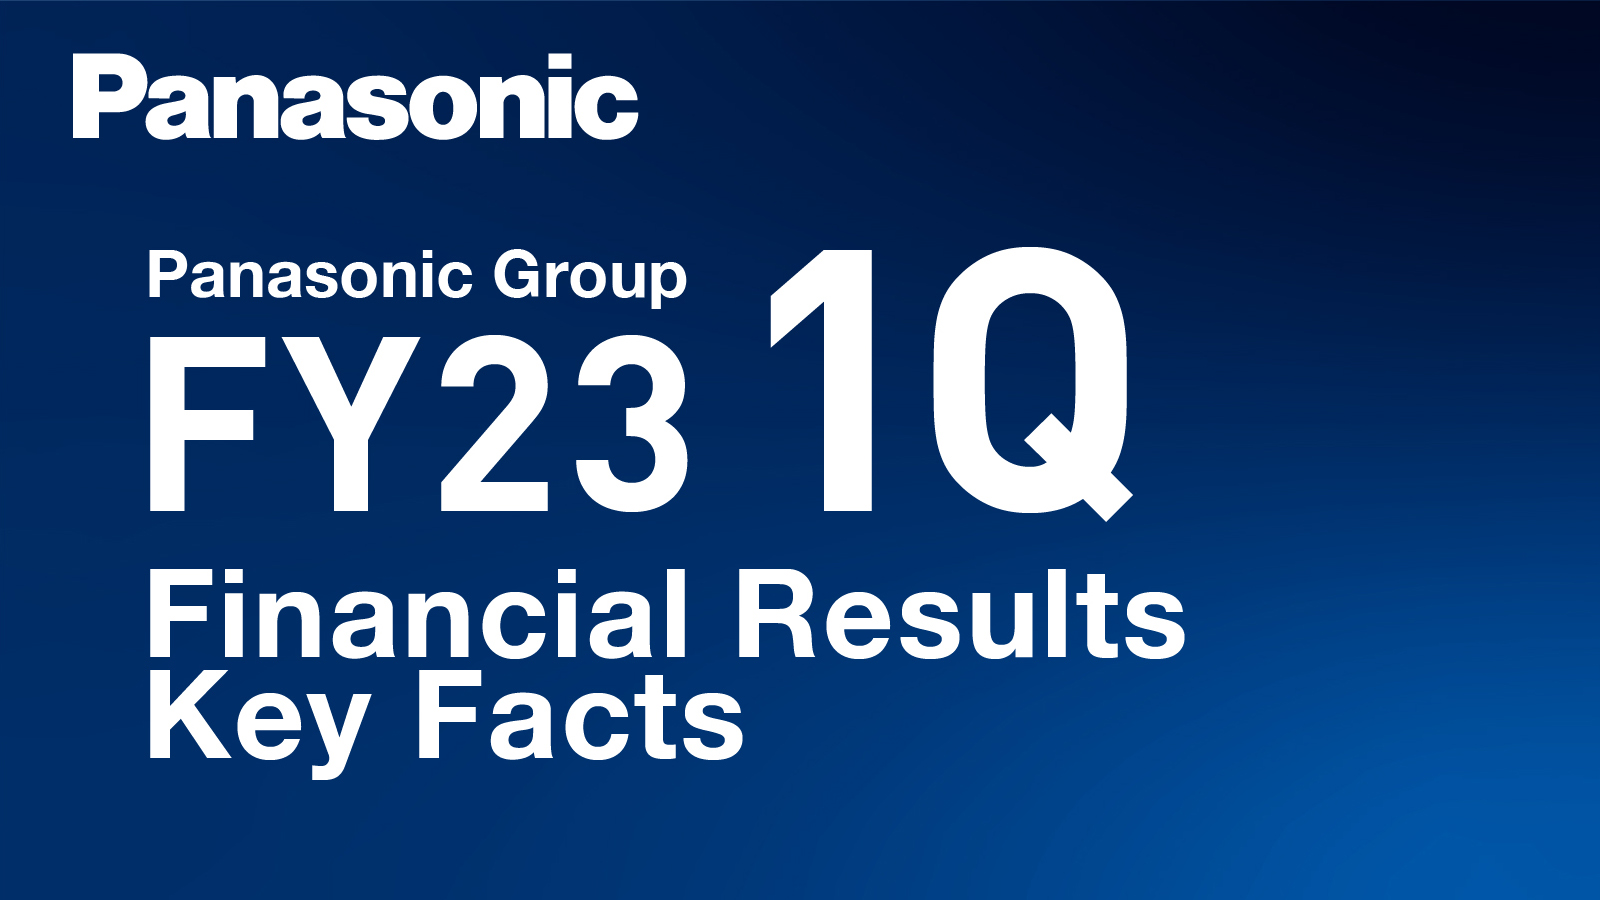 Panasonic Group FY23 1Q Financial Results Key Facts